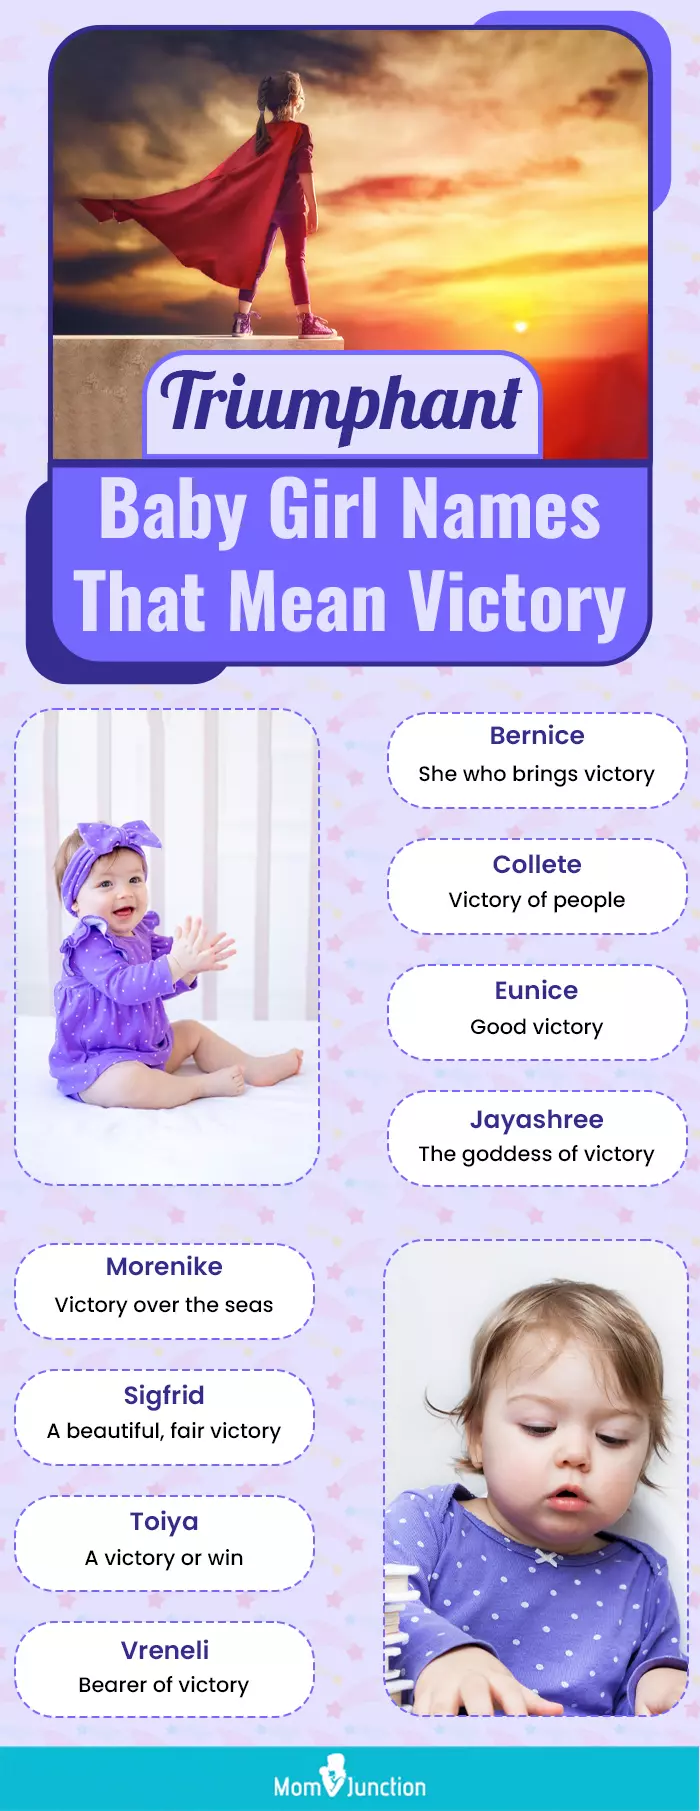 Wonderful Baby Girl Names Signifying Victory (infographic)